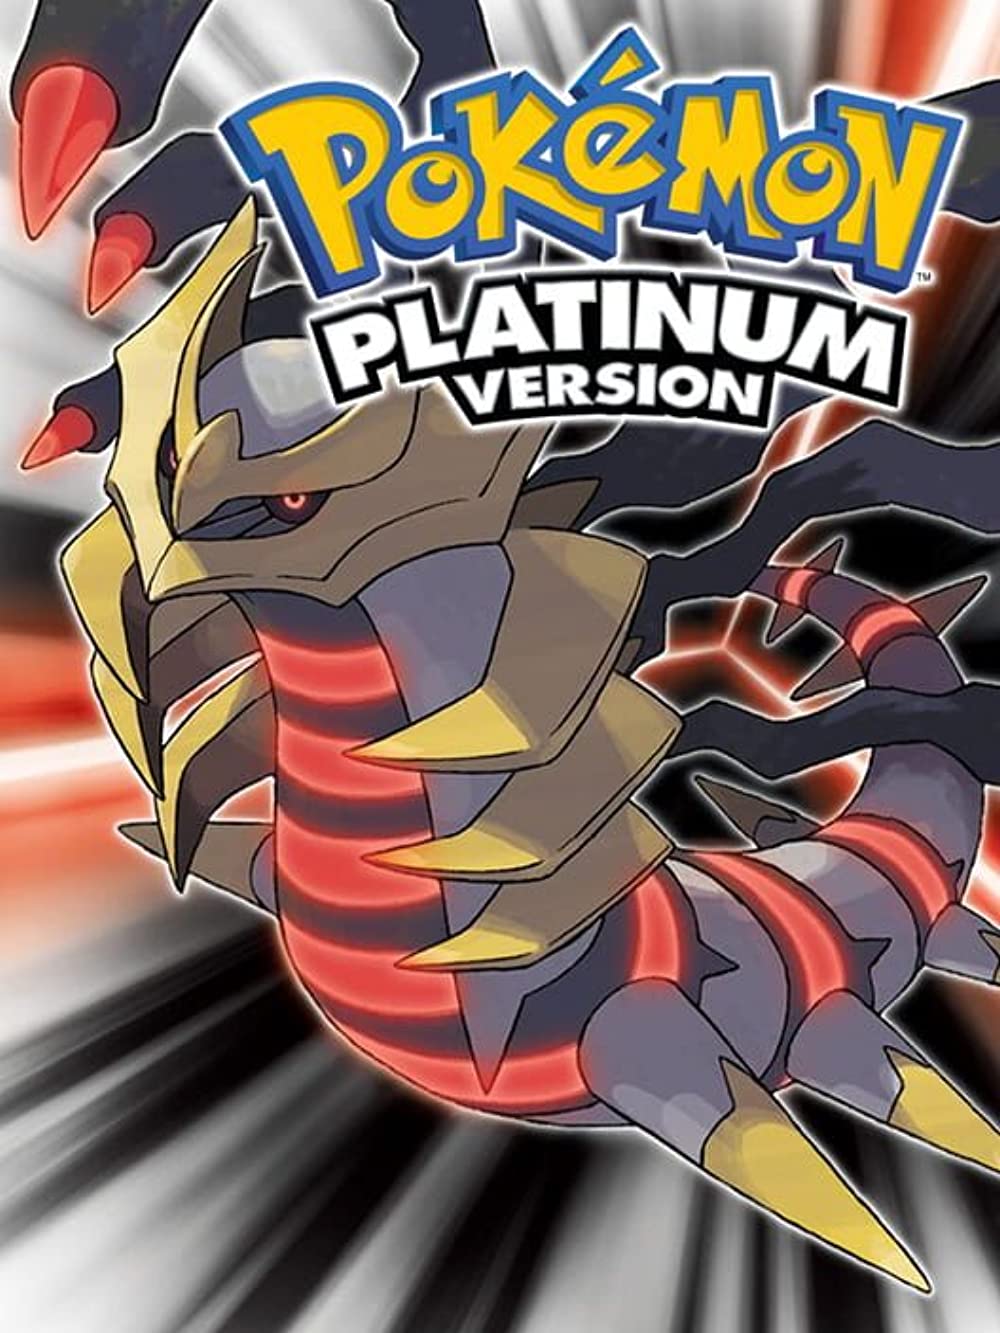 Pokémon Platinum Version is a 2008 role-playing video game developed by Game Freak, published by The Pokémon Company and Nintendo for the Nintendo DS handheld game console.